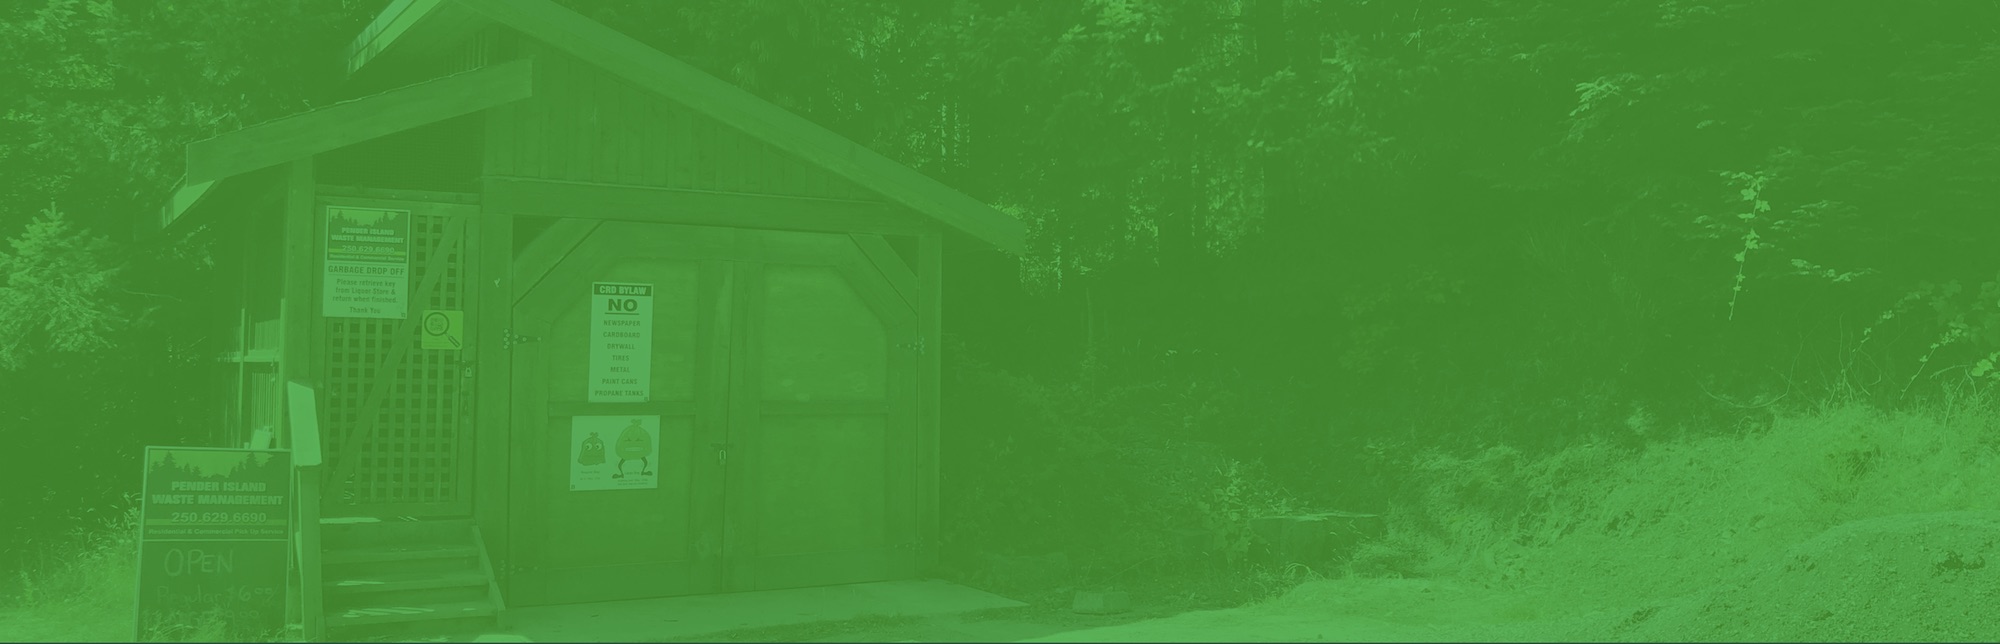 pender island disposal services collection station green filter